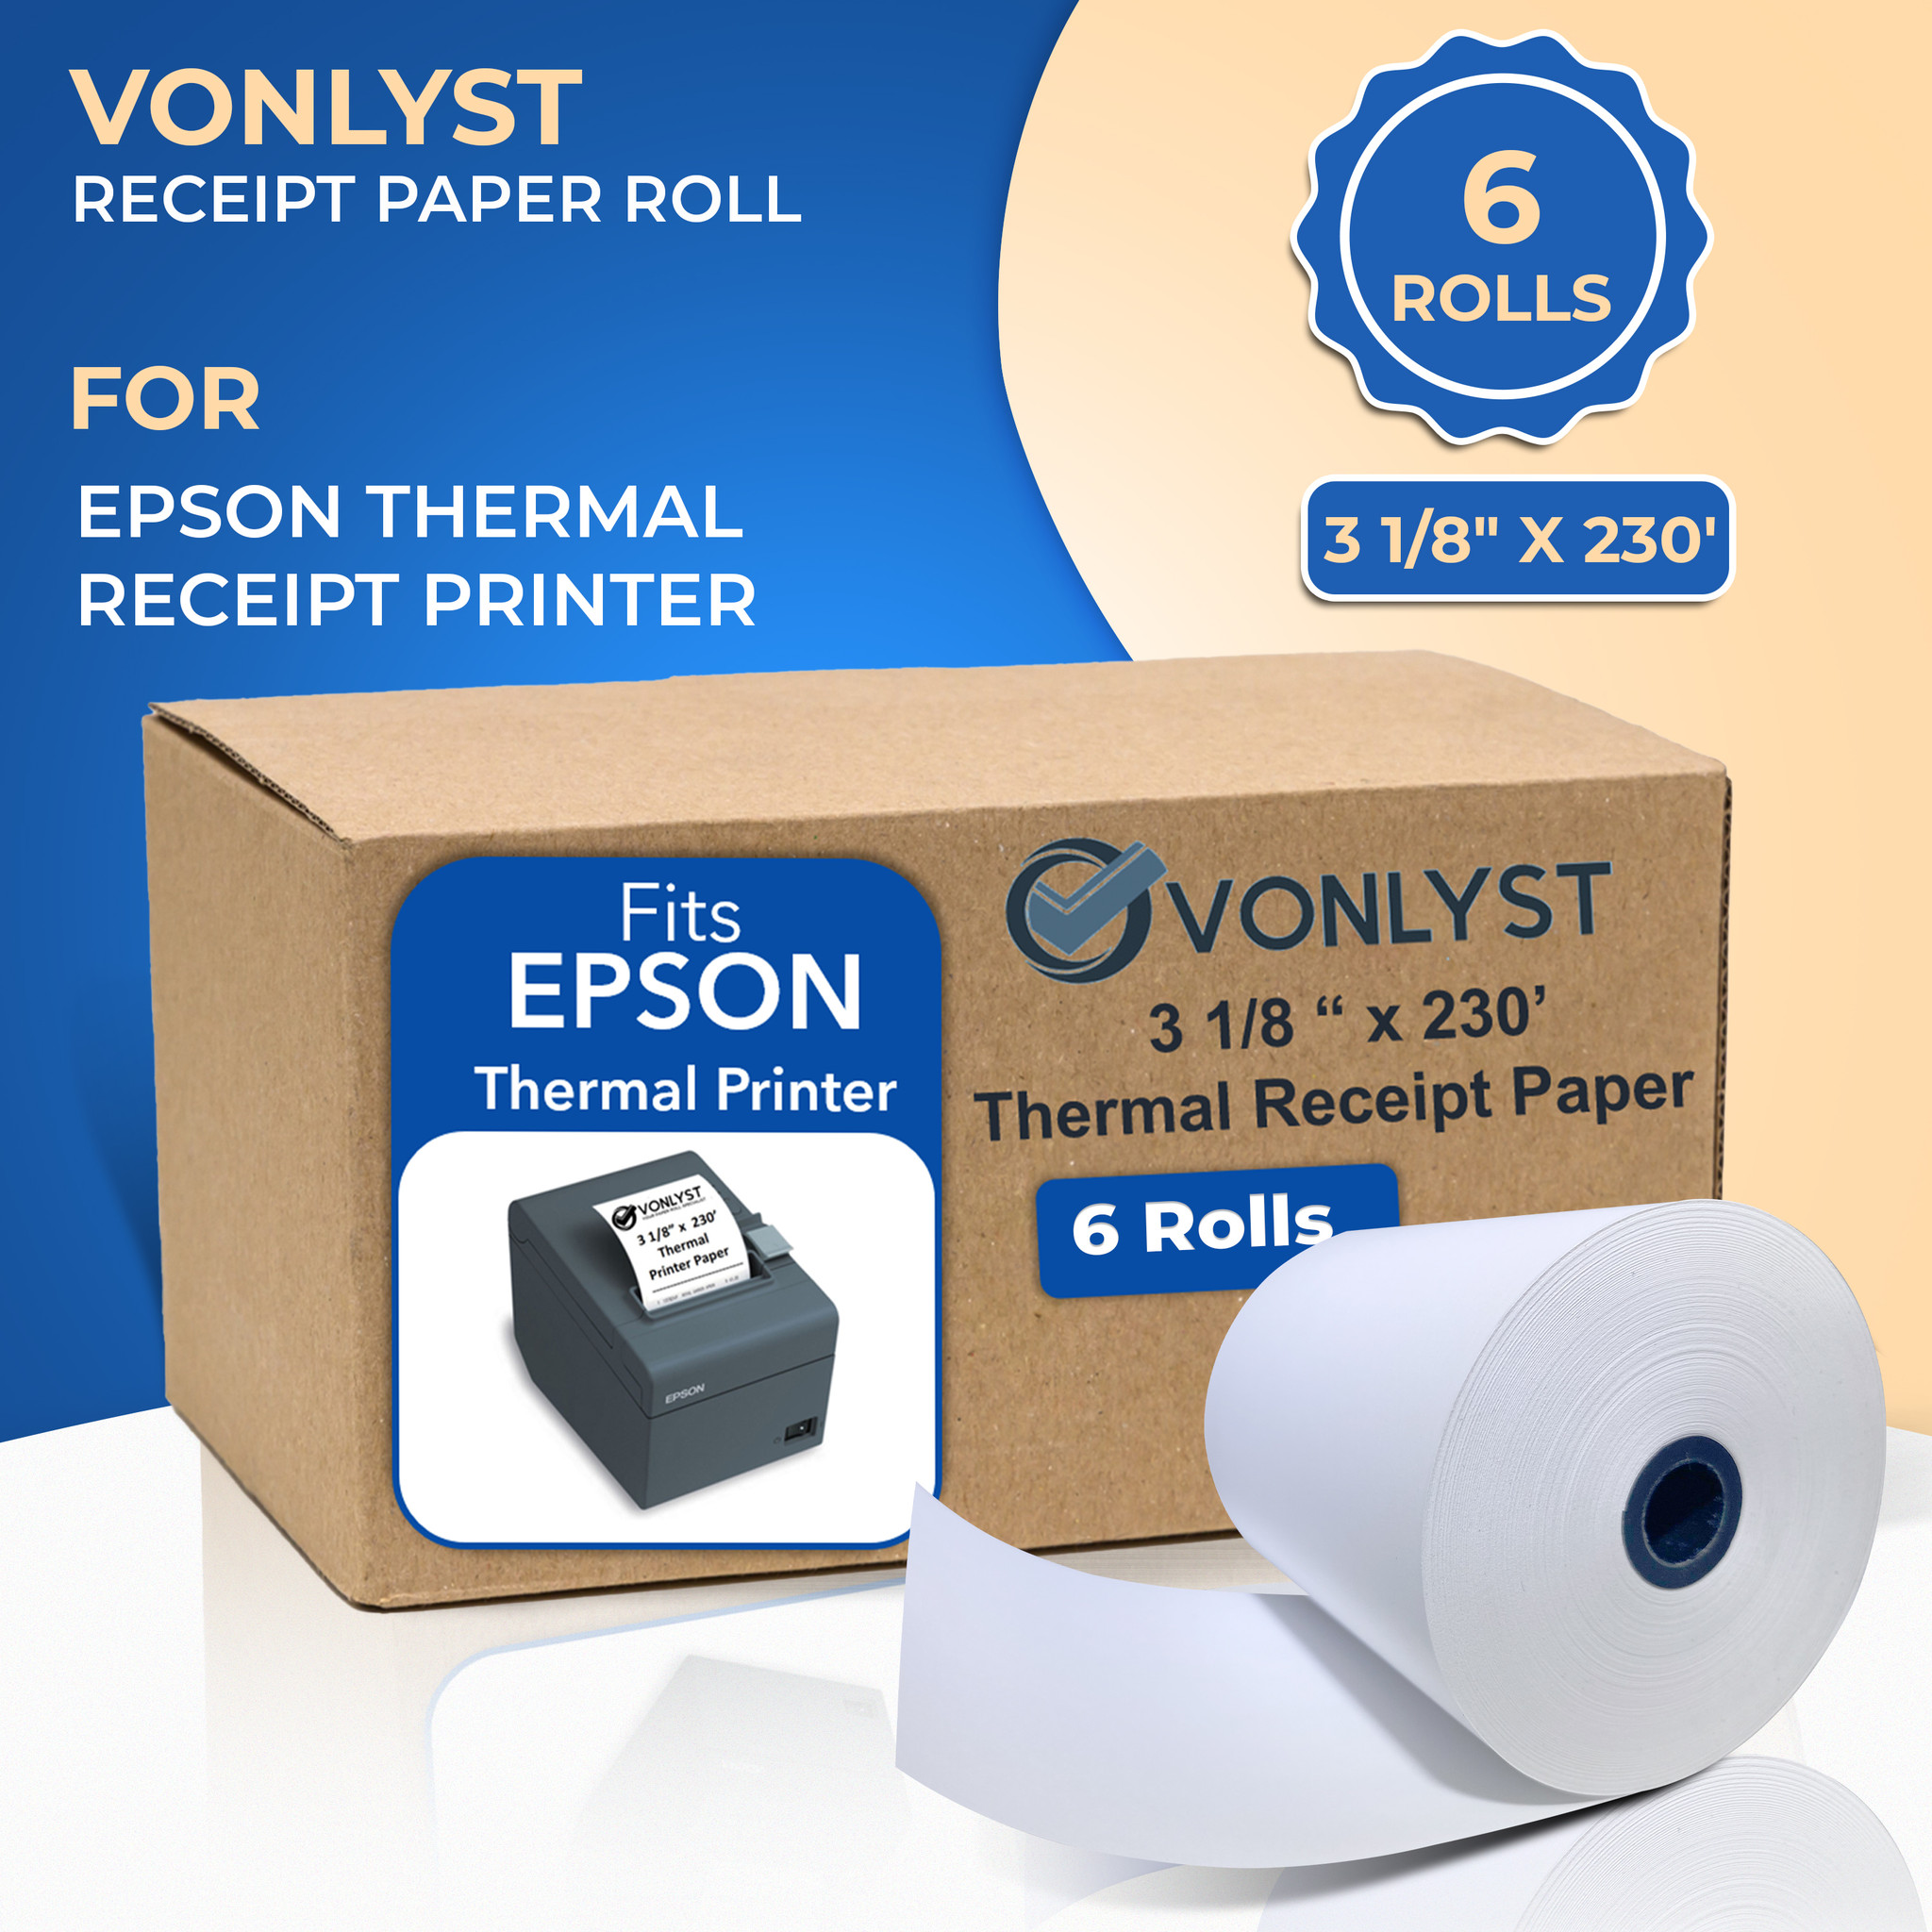 Epson Thermal Receipt Paper Roll 3 1/8 x 230' - Box with 06 - Vonlyst